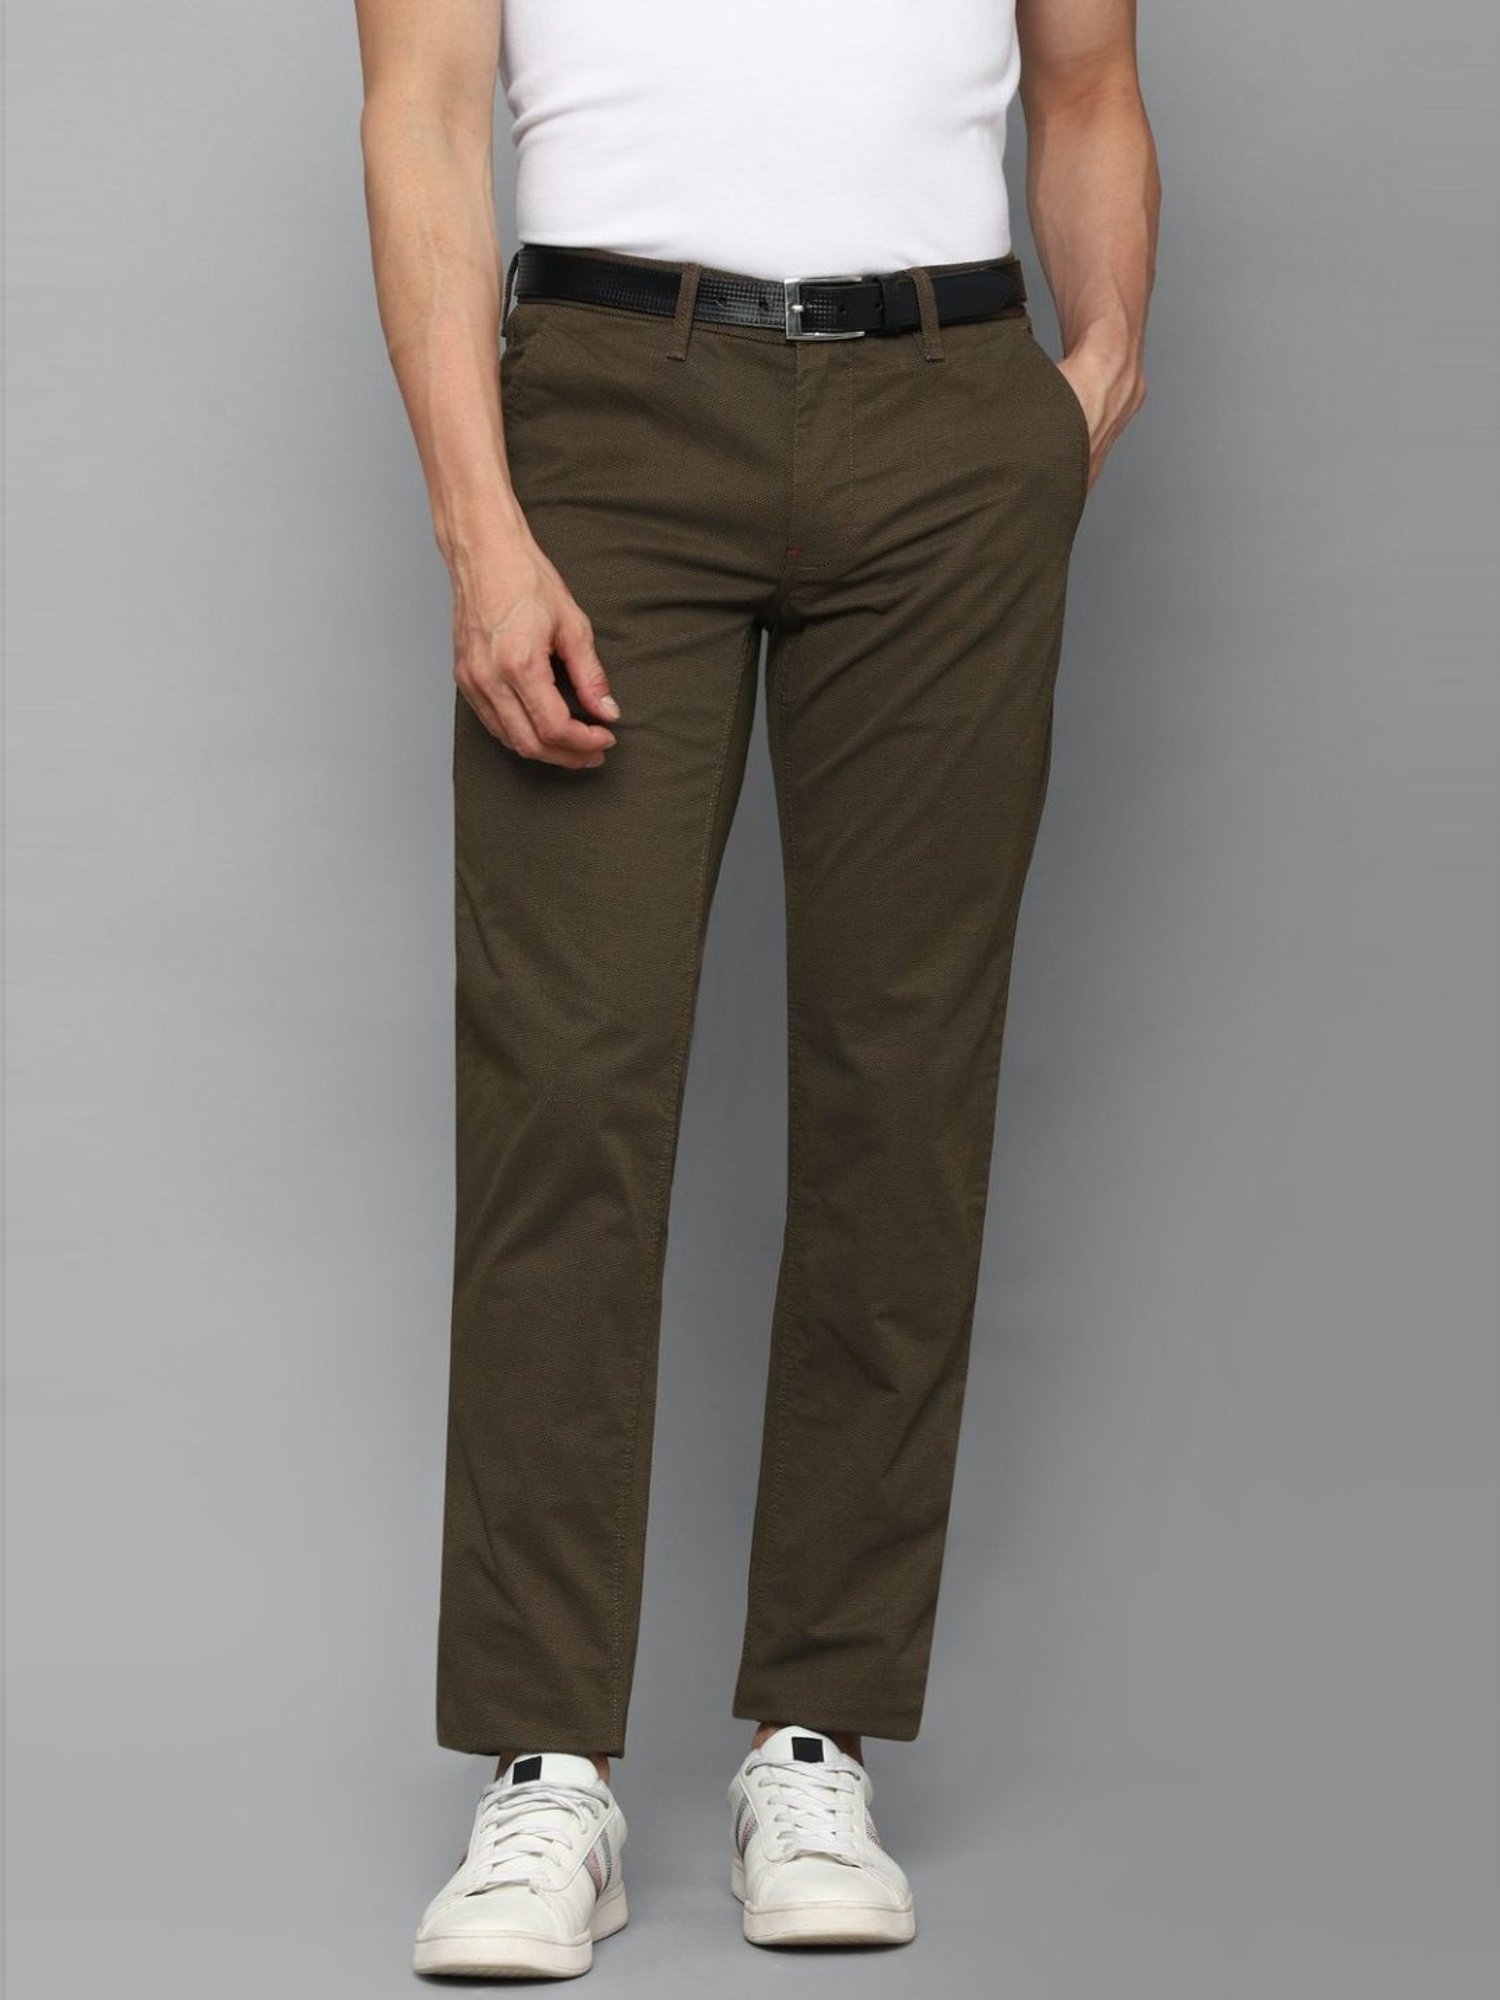 US POLO ASSN Casual Trousers  Buy US POLO ASSN Men Light Brown  Denver Slim Fit Casual Trousers Online  Nykaa Fashion